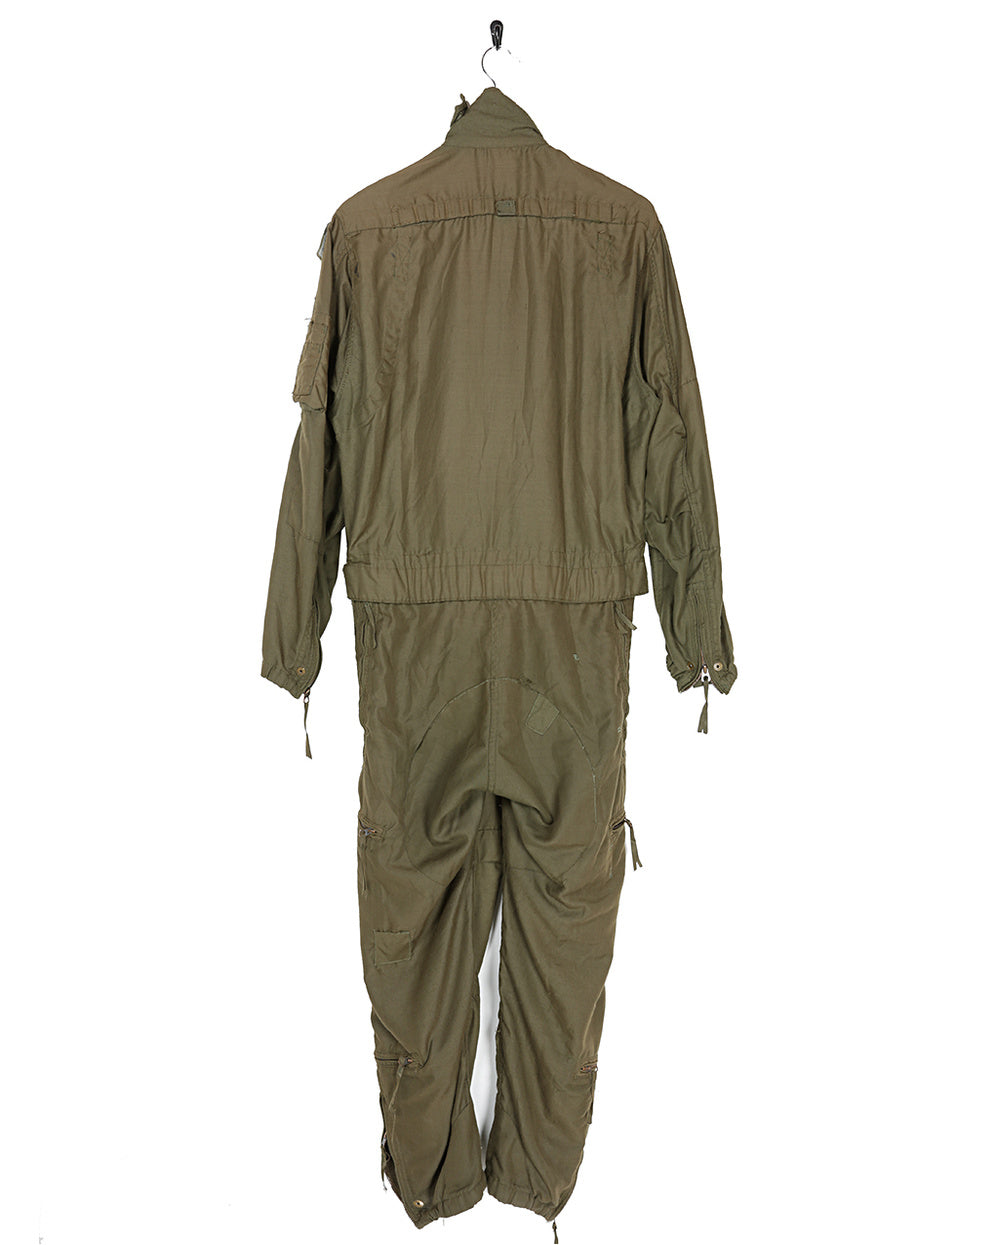 1990s Gulf War Vintage US army Patched Green Nomex Tanker Coveralls - Large